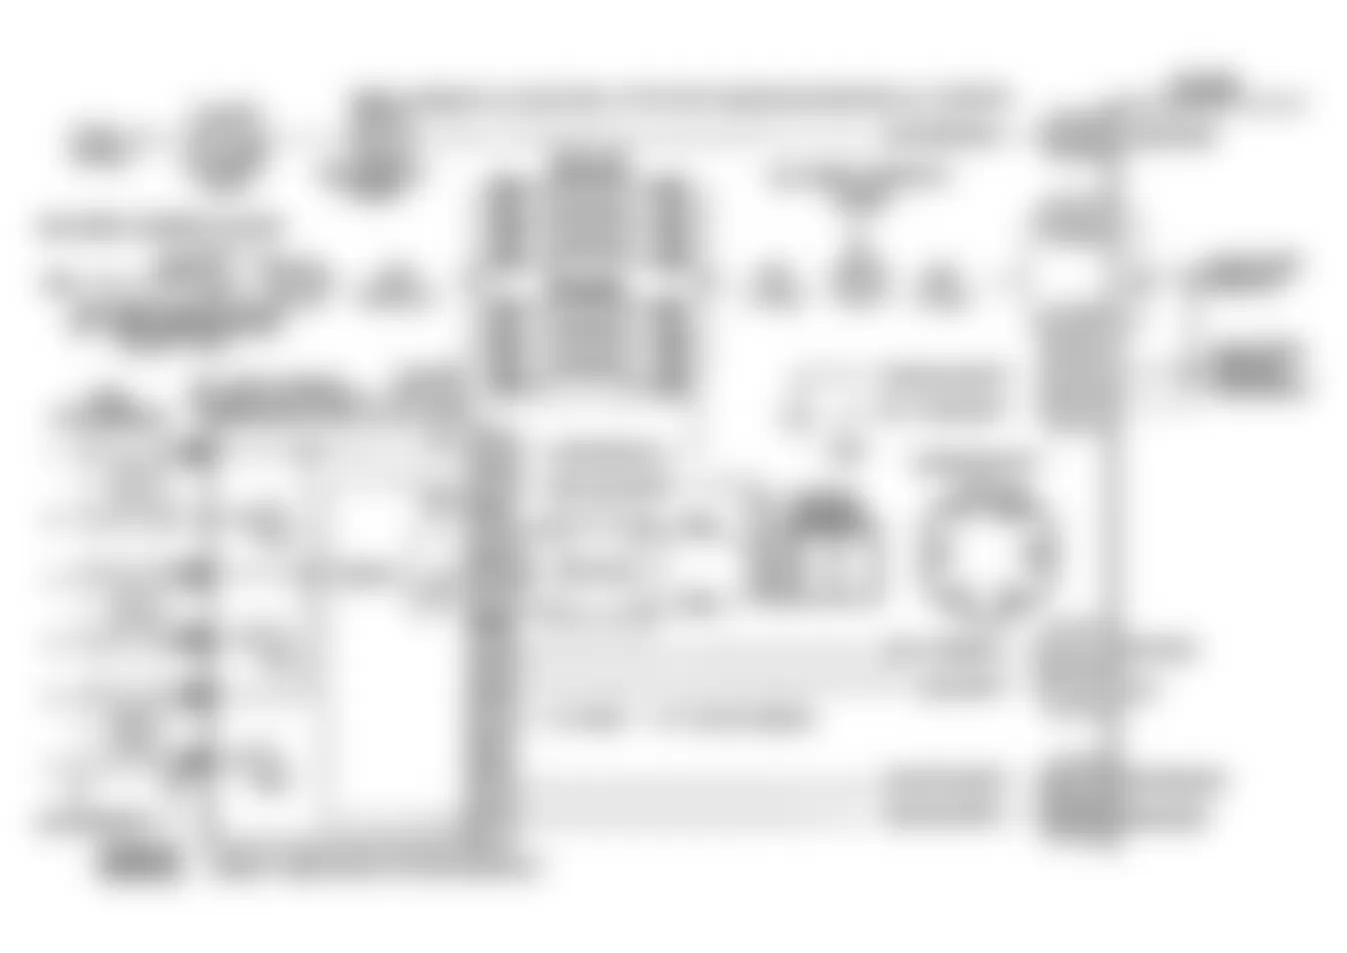 Buick Regal Custom 1993 - Component Locations -  Code 42 Schematic (3.1L W Body (Exc. Calif.)) EST Circuit Open Or Grounded